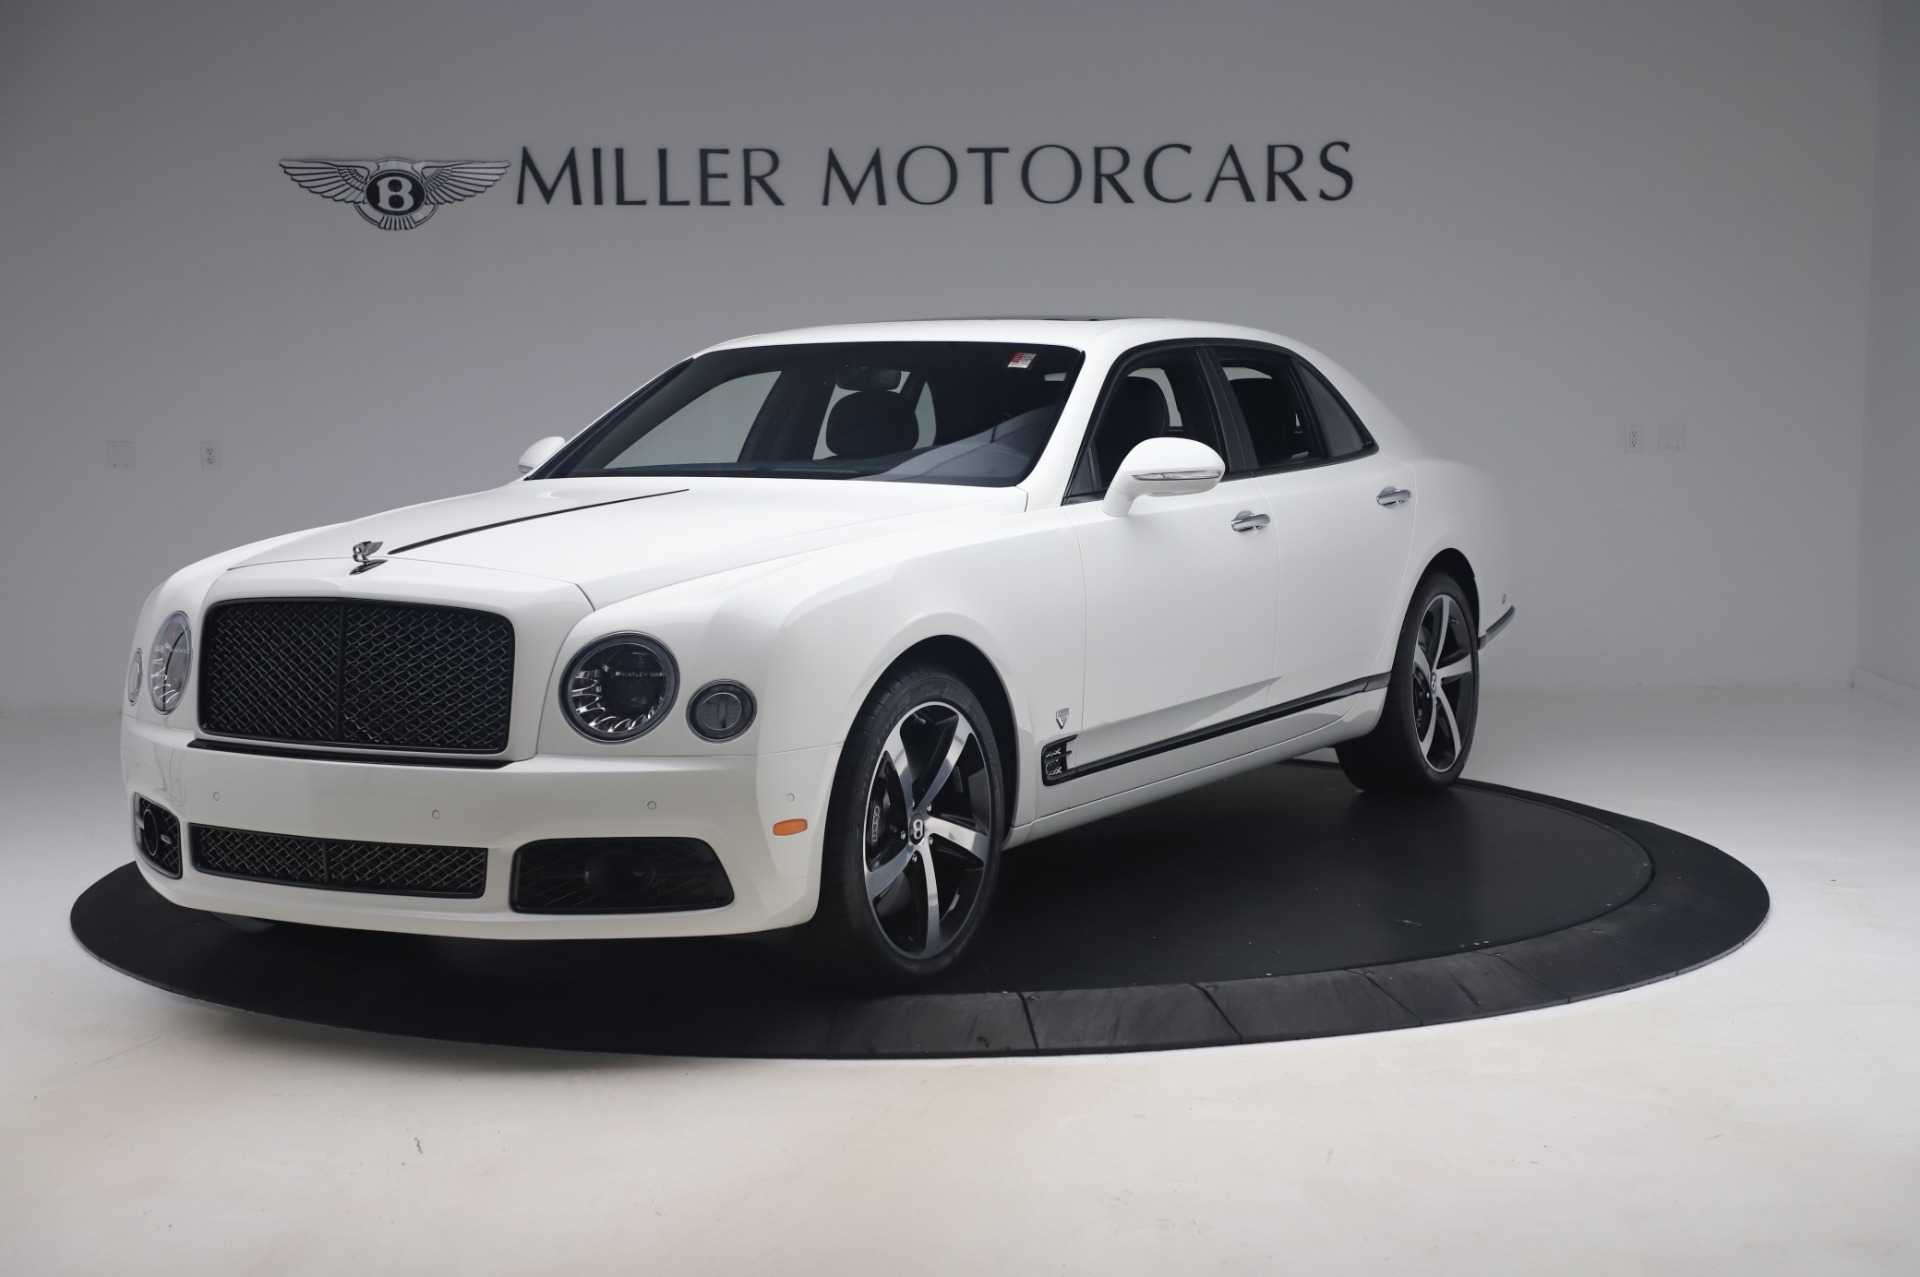 New 2020 Bentley Mulsanne 6.75 Edition by Mulliner for sale Sold at Bentley Greenwich in Greenwich CT 06830 1